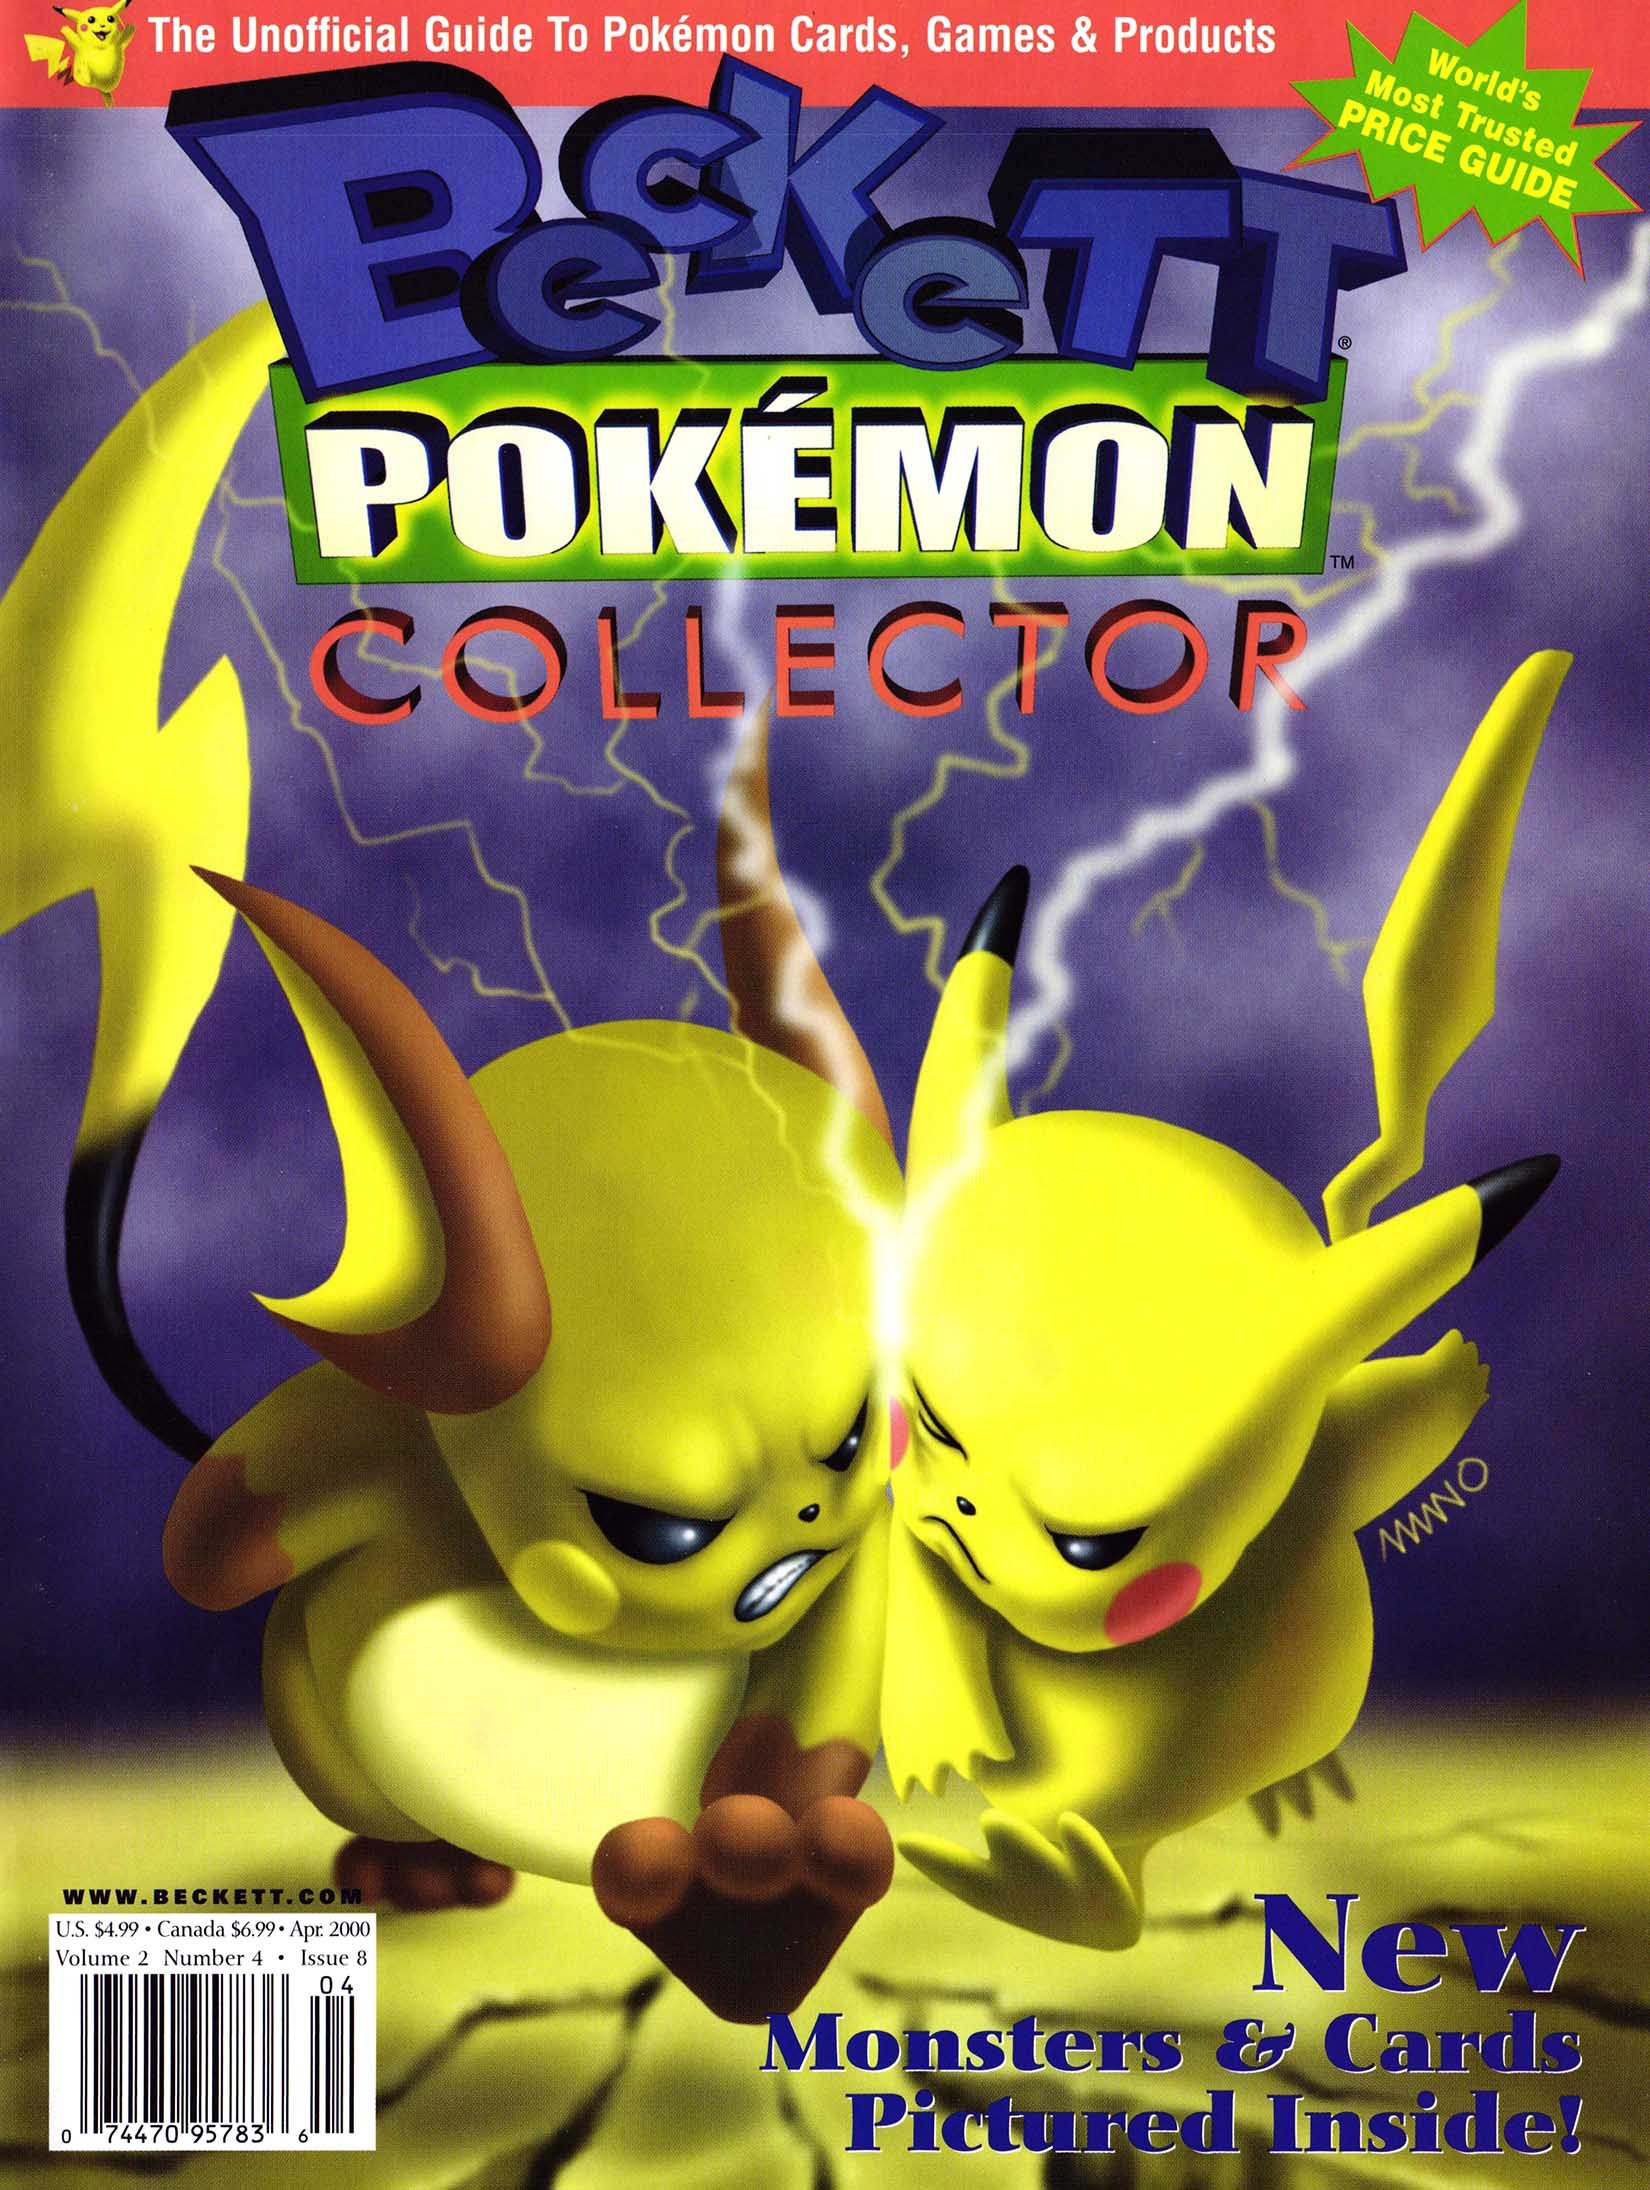 Beckett Pokemon Collector Issue 008 (April 2000)